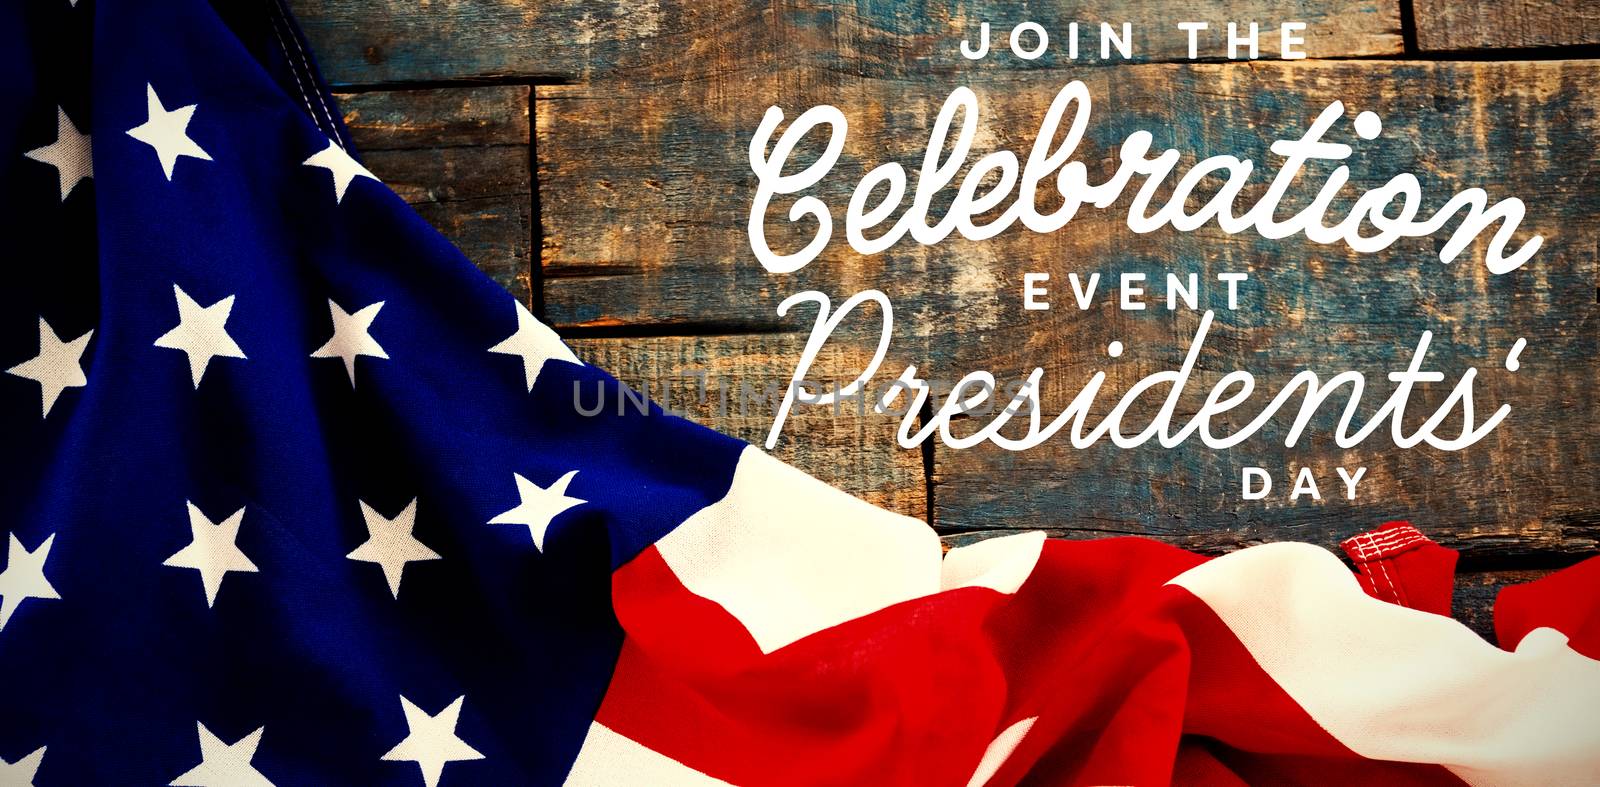 Presidents Day Message with Copy Space by Wavebreakmedia